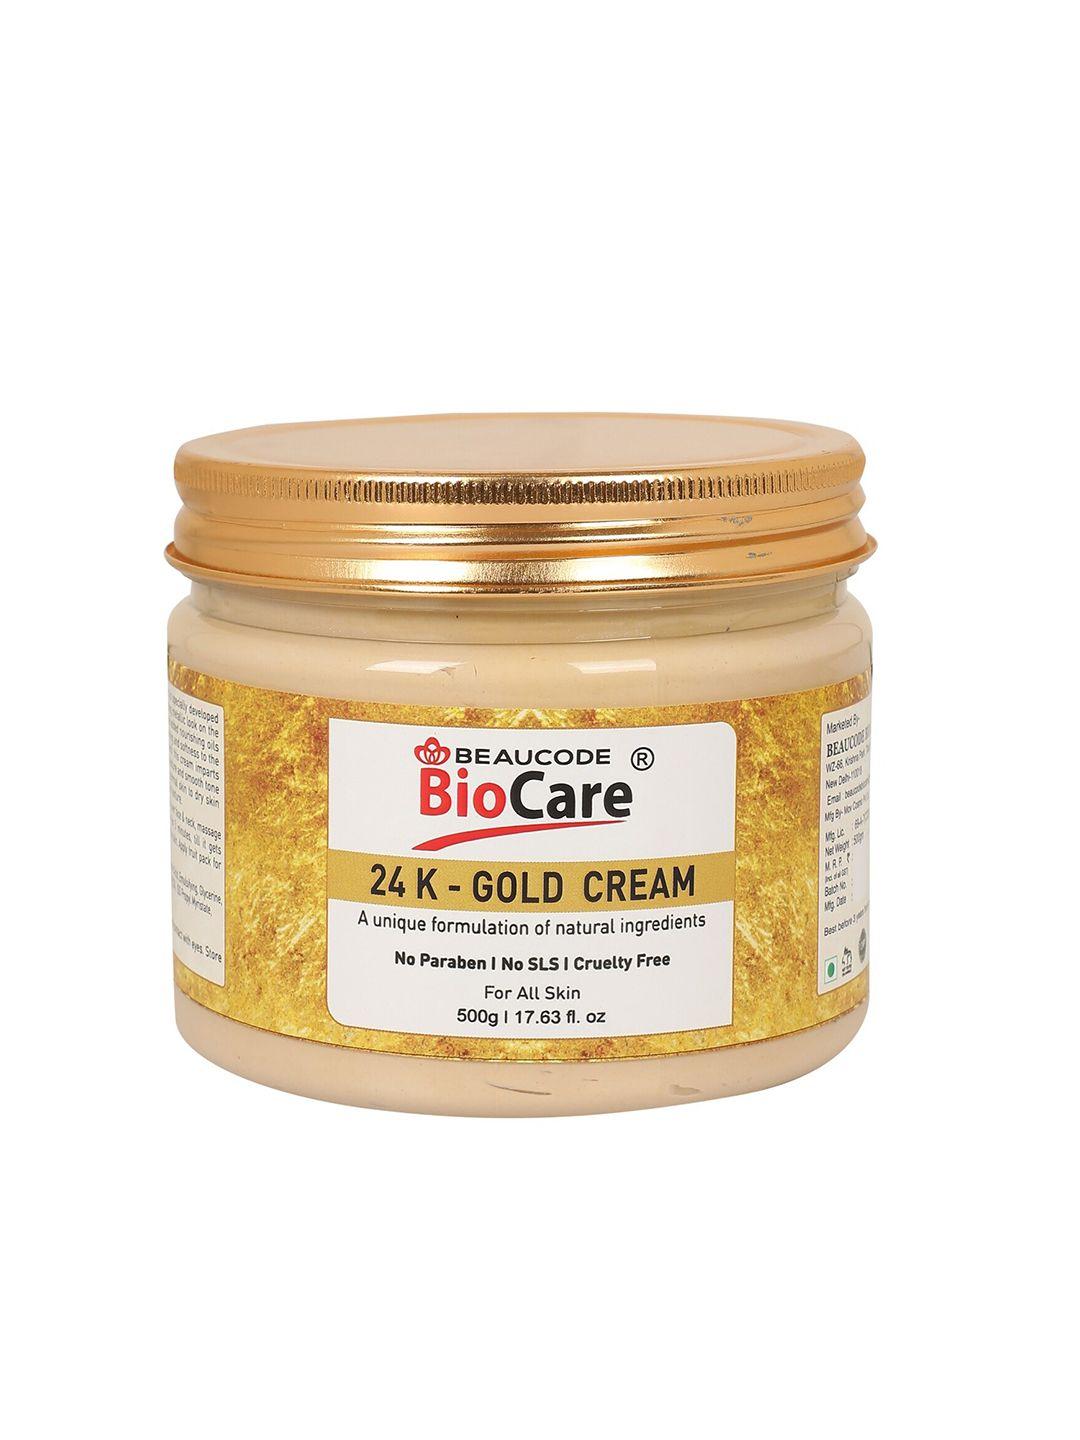 beaucode biocare 24k-gold face & body cream for all skin types - 500 g